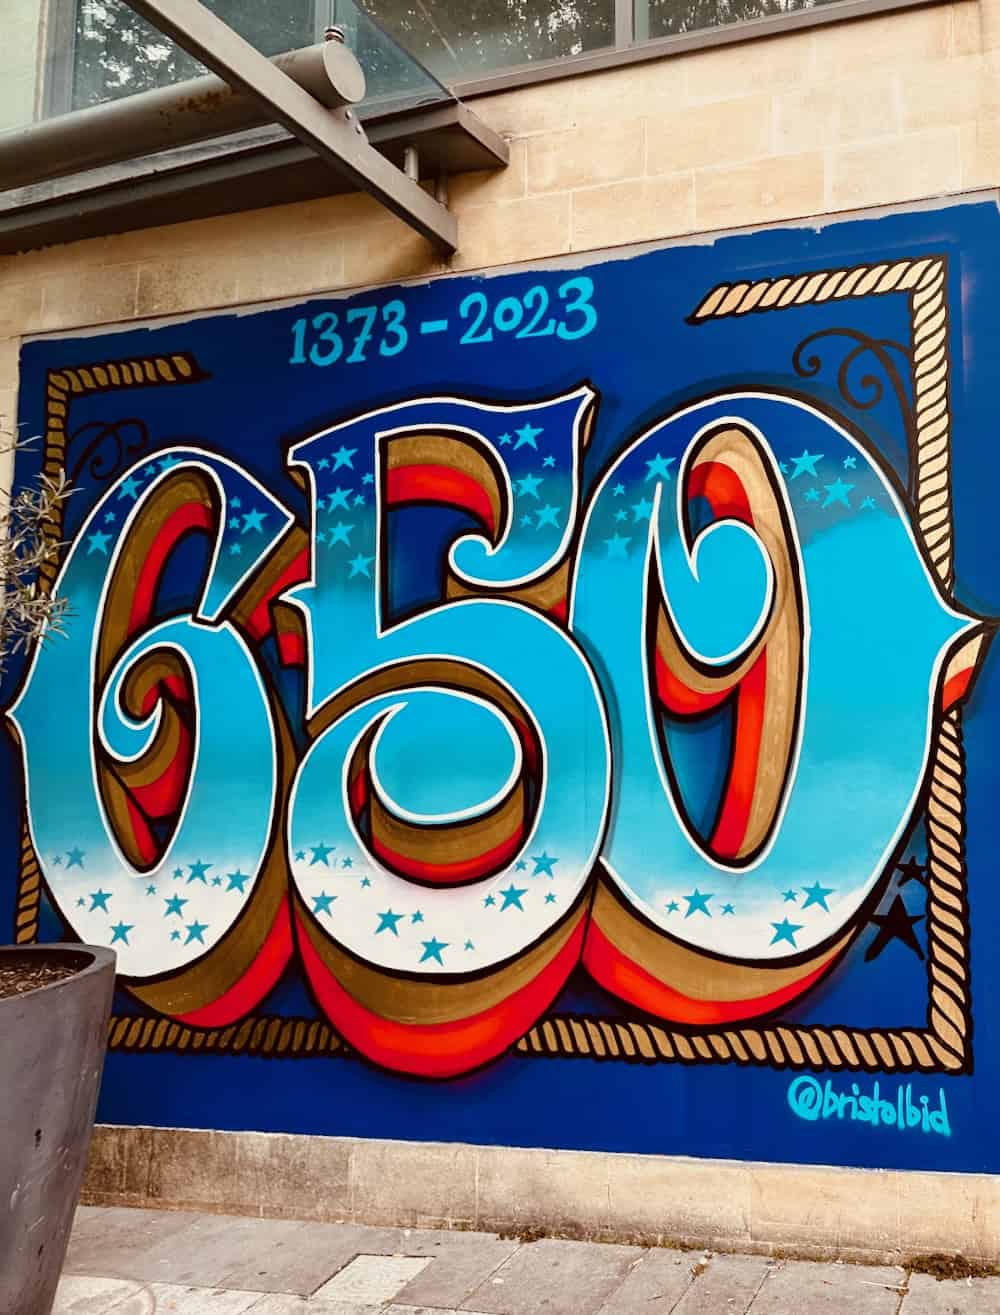 Bristol 650 logo painted onto a wall in the centre. Marking 650 years from 1373 to 2023 since Bristol became a city and a county.